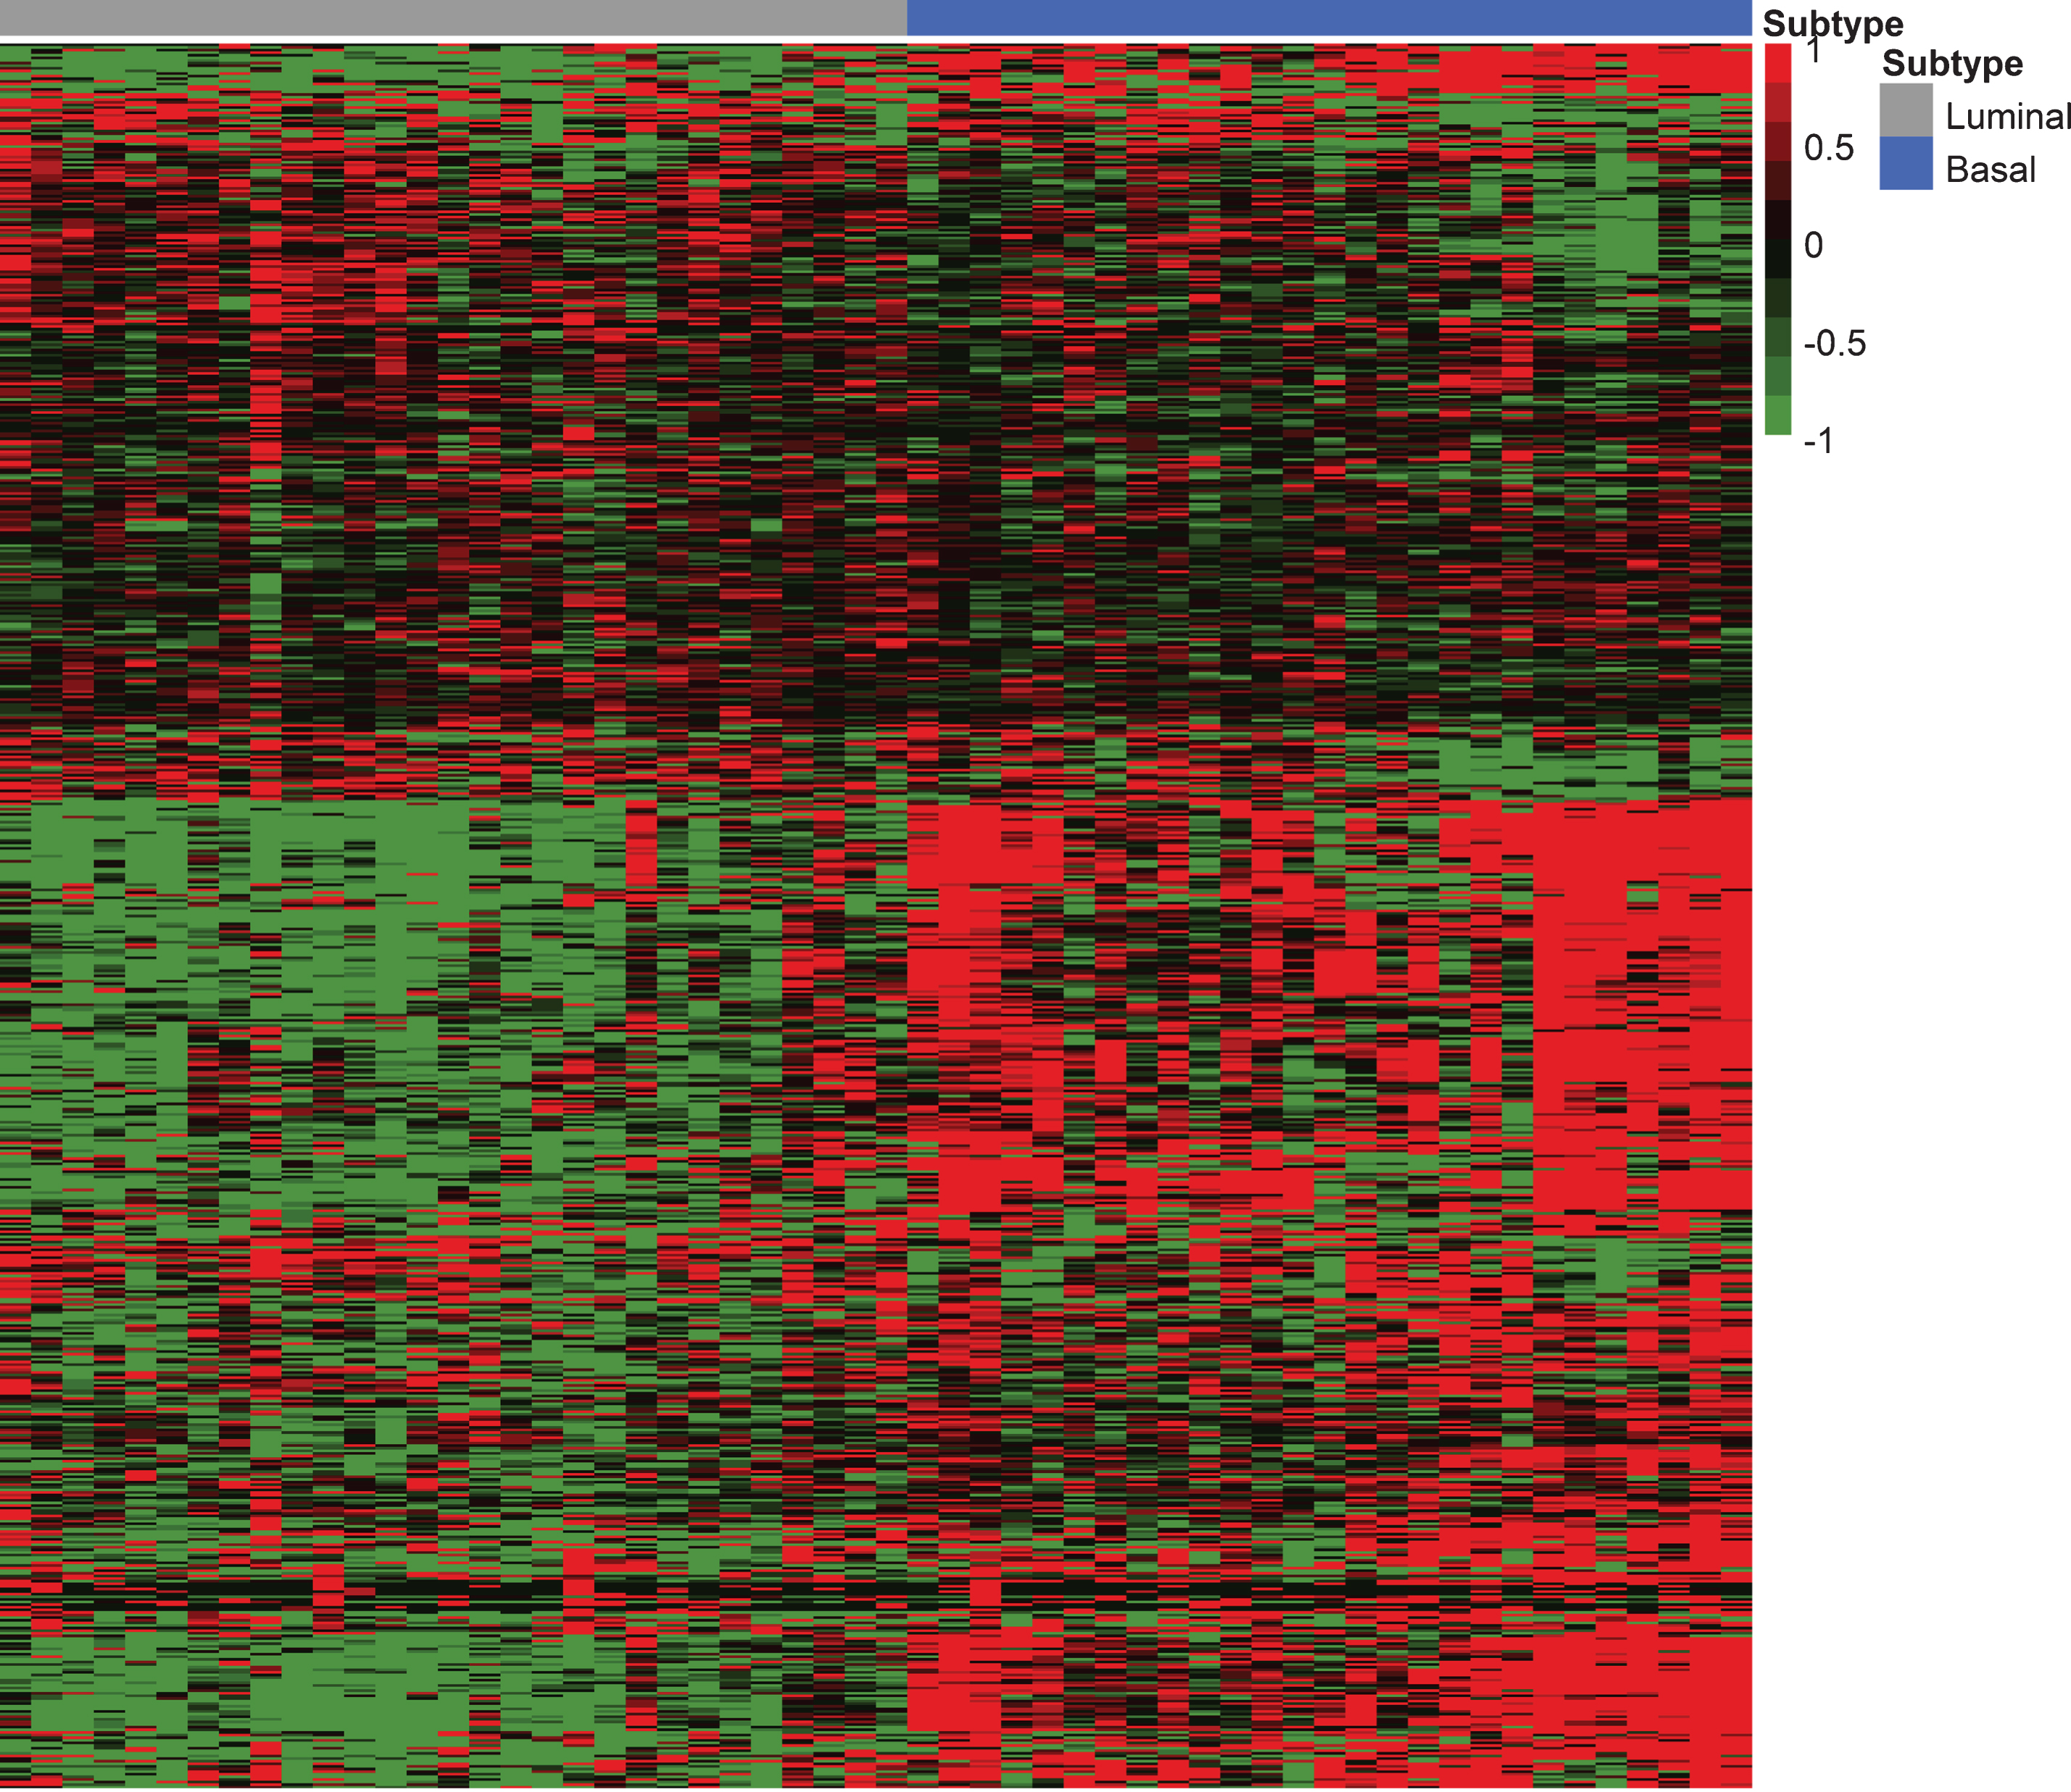 Canine InvUC RNA-seq analyses. In the heatmap, the luminal and basal subtype tumors (gray and blue column headings, respectively) were defined by class prediction model [21]. The data were interrogated for genes associated with cancer progression across cancer types (nCounter® PanCancer Progression Gene Panel, n = 770 genes, Nanostring Technologies, Seattle, WA). Genes enriched in canine InvUC tumors were queried against these genes (canine orthologs identified for n = 669 genes) which are listed in Supplementary Table S2 in the same order as in the heatmap. Note the strong enrichment for genes associated with cancer progression in the canine InvUC samples. The top most significant gene ontology (GO) terms associated with these genes (n = 20) are summarized in Fig. 4.